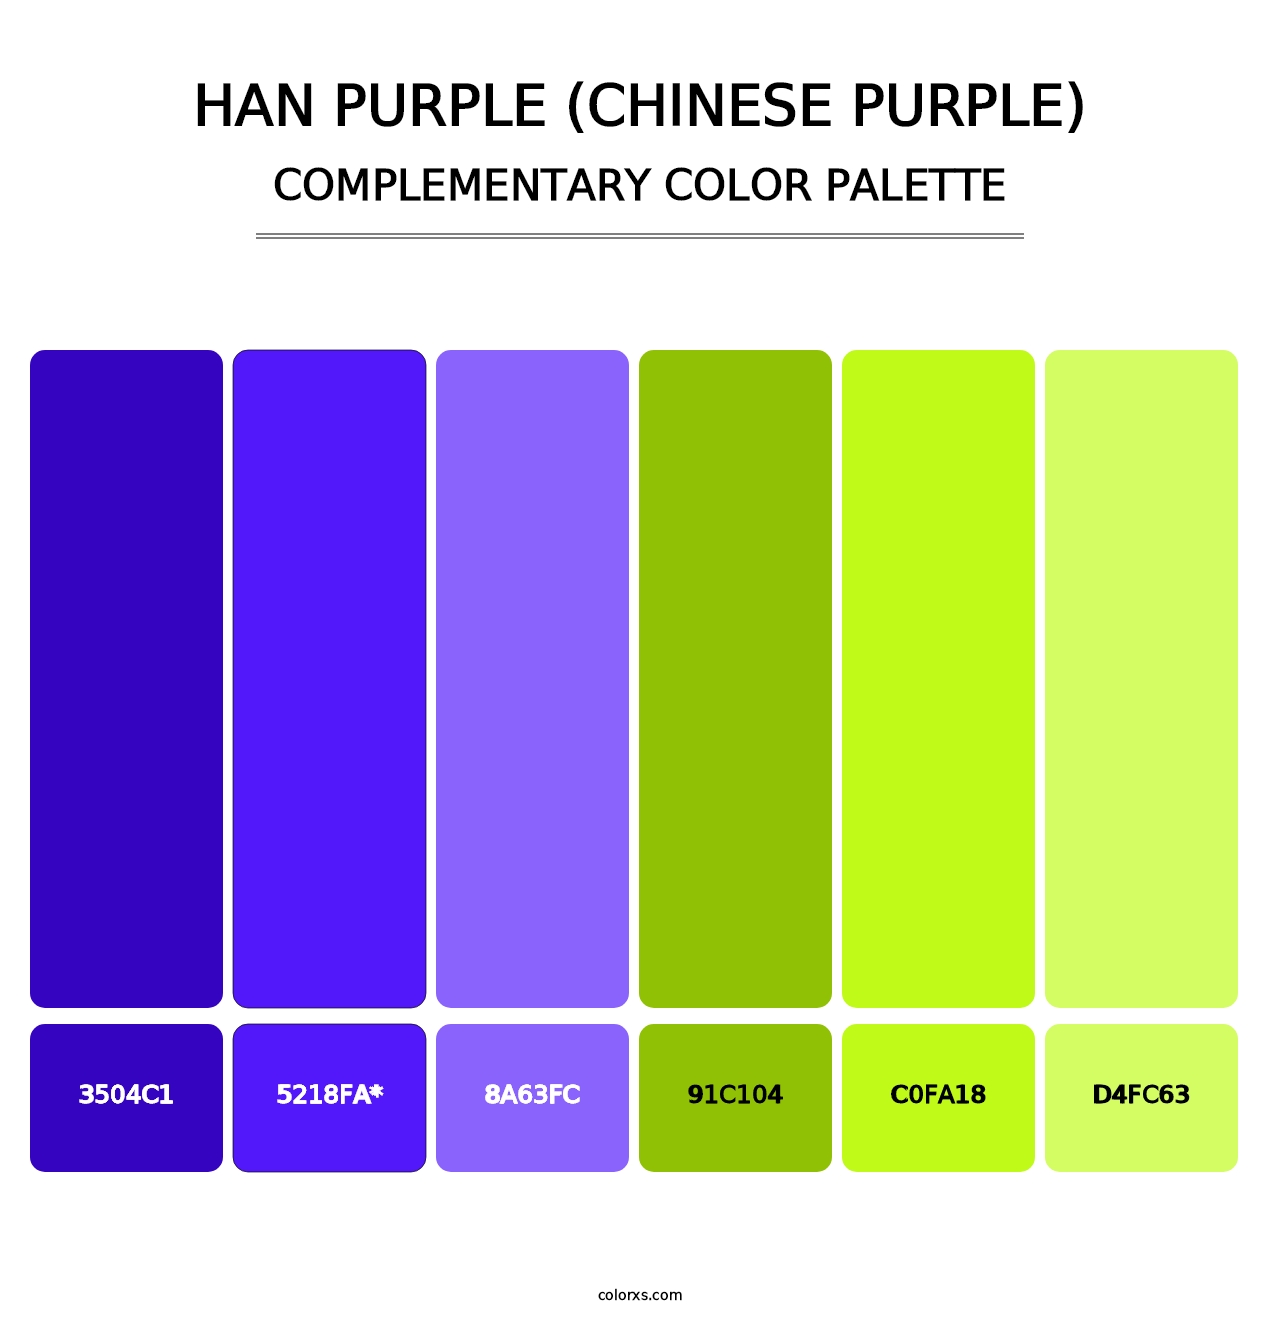 Han Purple (Chinese Purple) - Complementary Color Palette